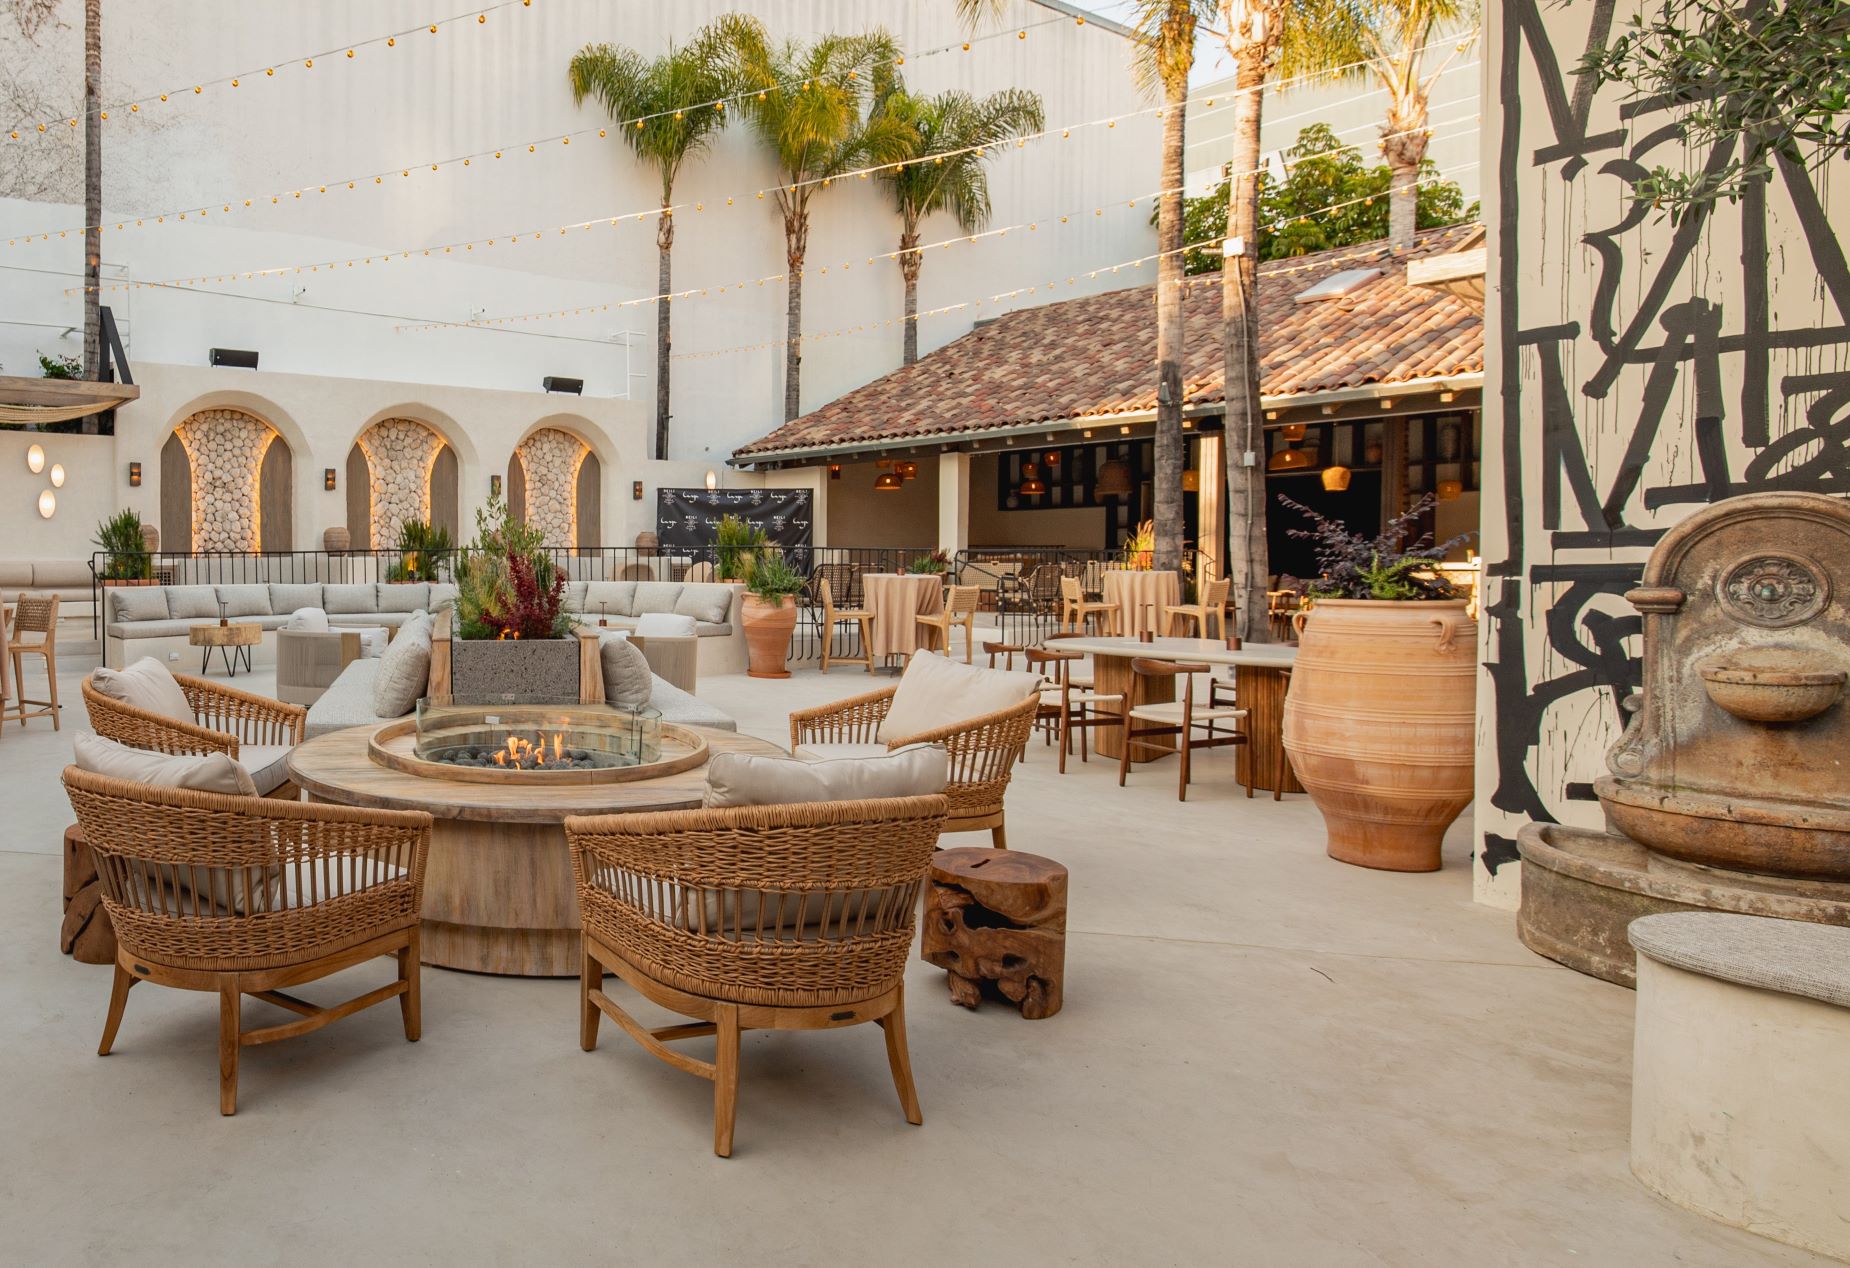 An image of the outdoor patio of Laya from the Laya and Meili Vodka event.